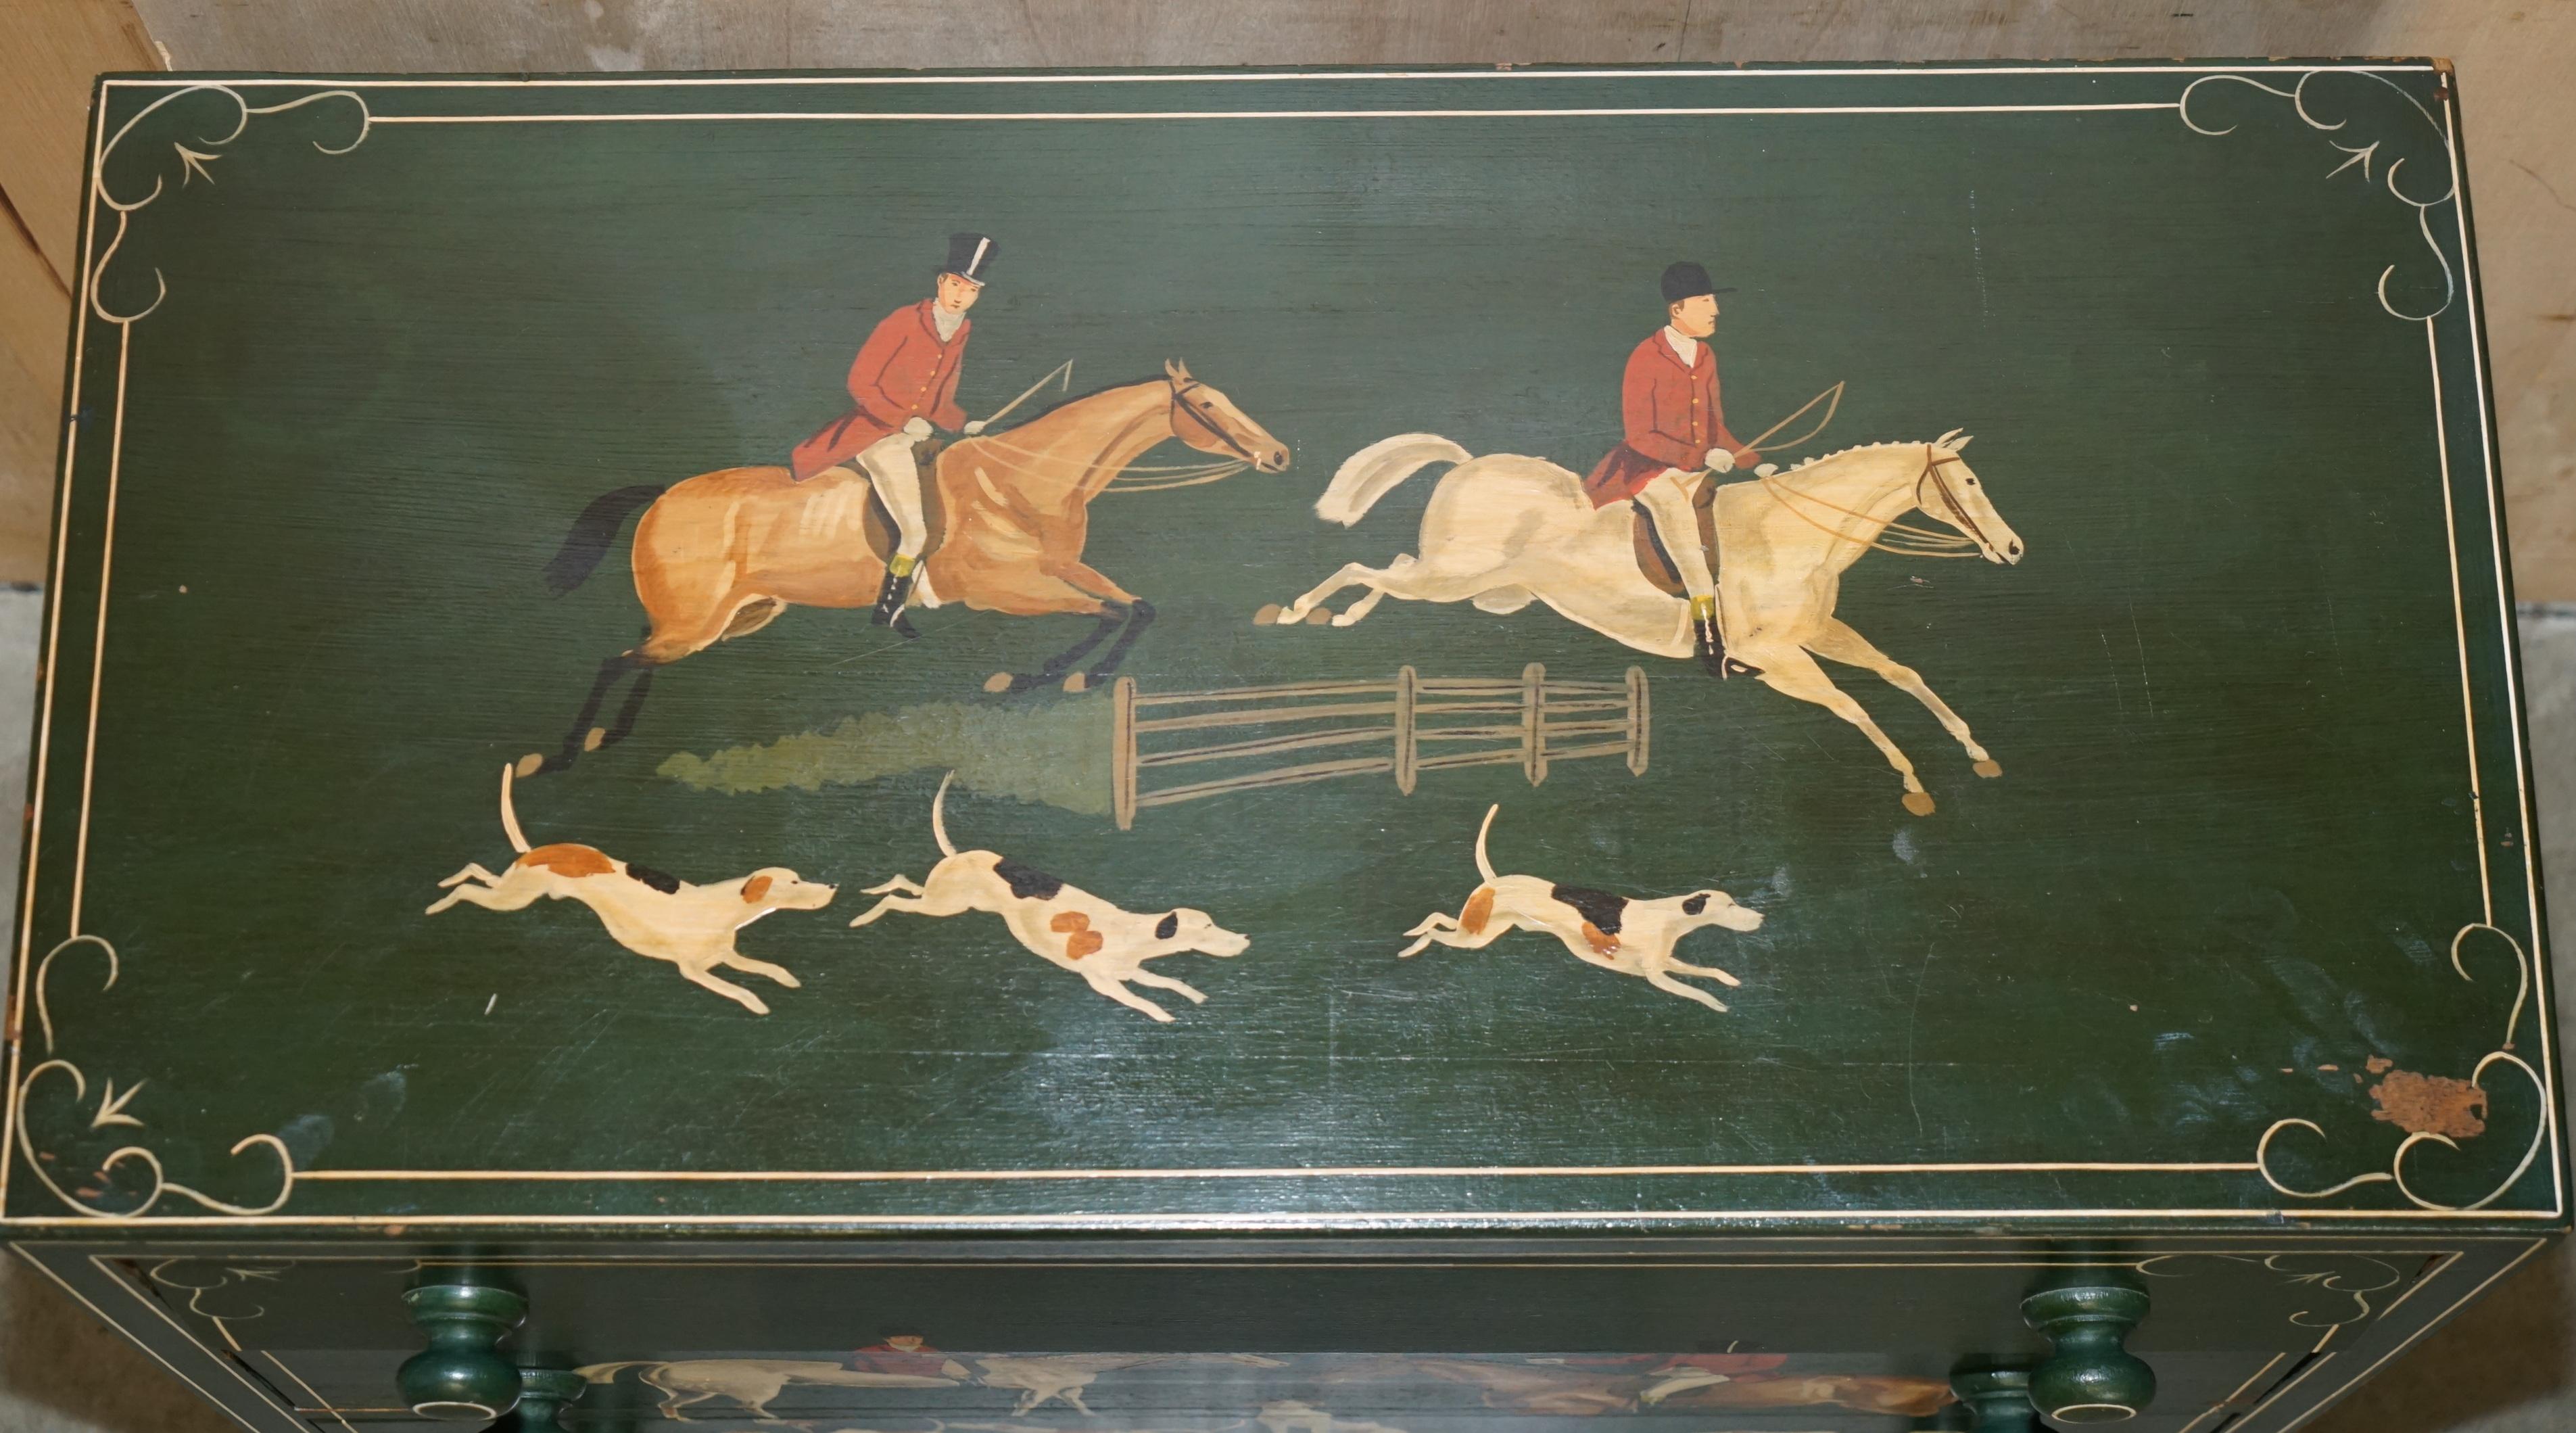 LOVELY ANTiQUE CHEST OF DRAWERS PAINTES EN GREEN DEPICTING HORSE & RIDER CIRCA 1900 en vente 3